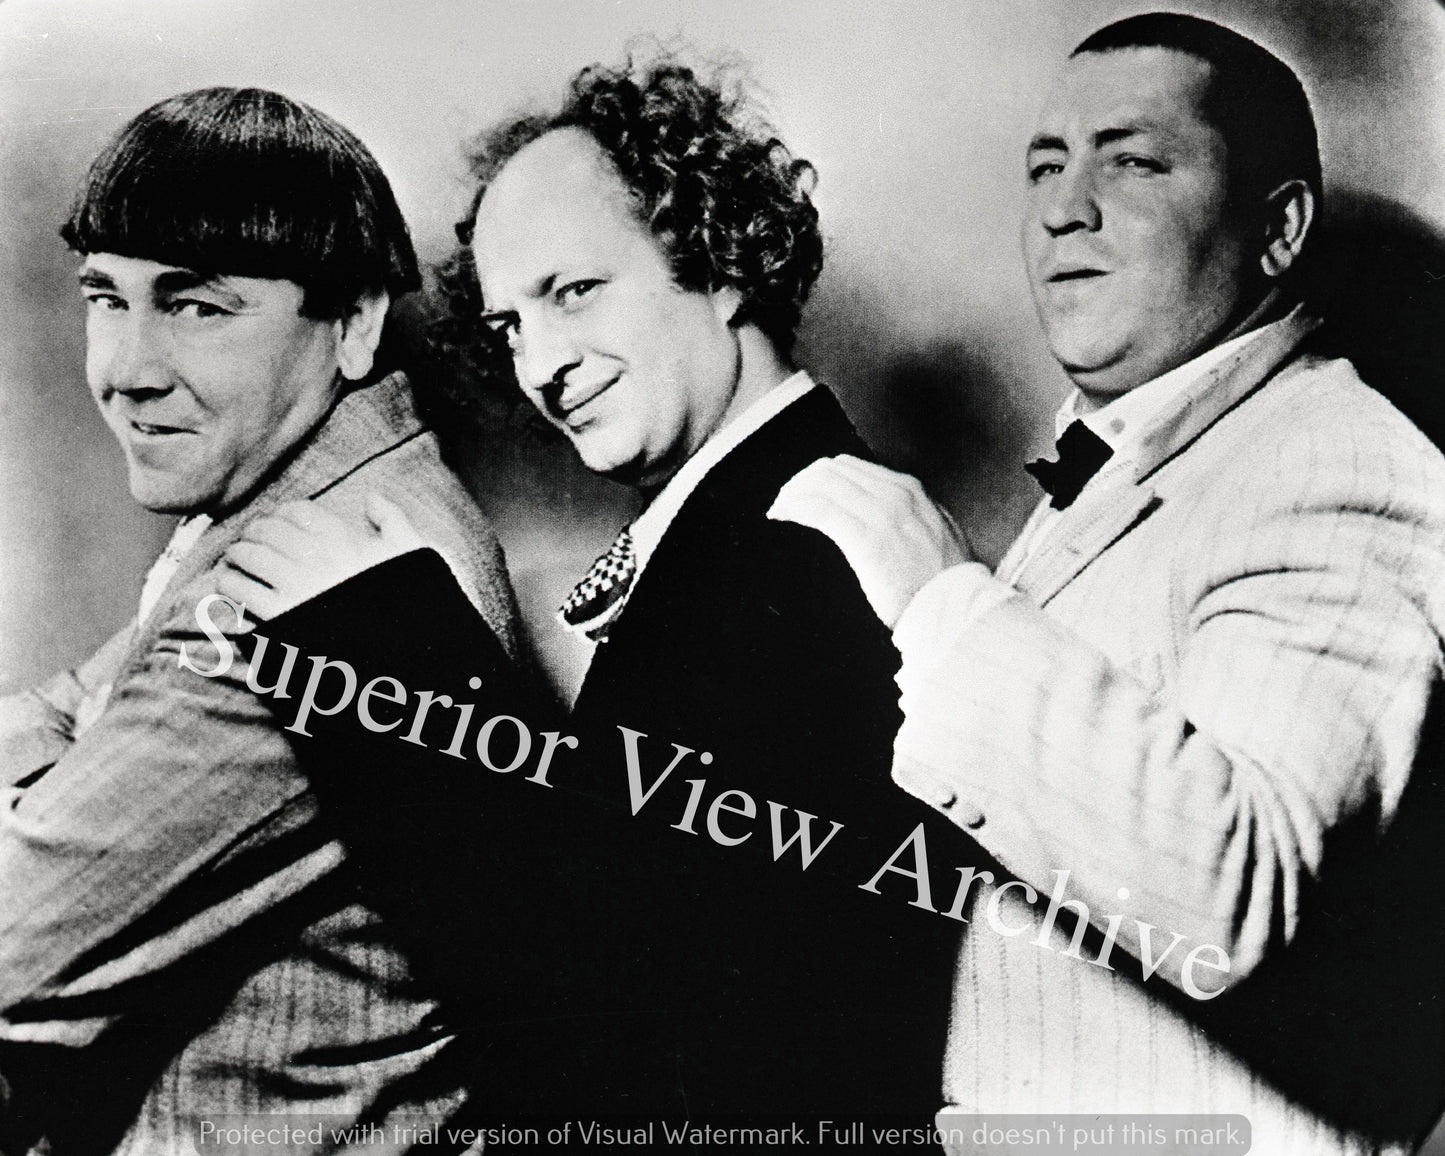 Classic Pose of The Three Stooges Larry Moe Curly In A Row Hands On Shoulders